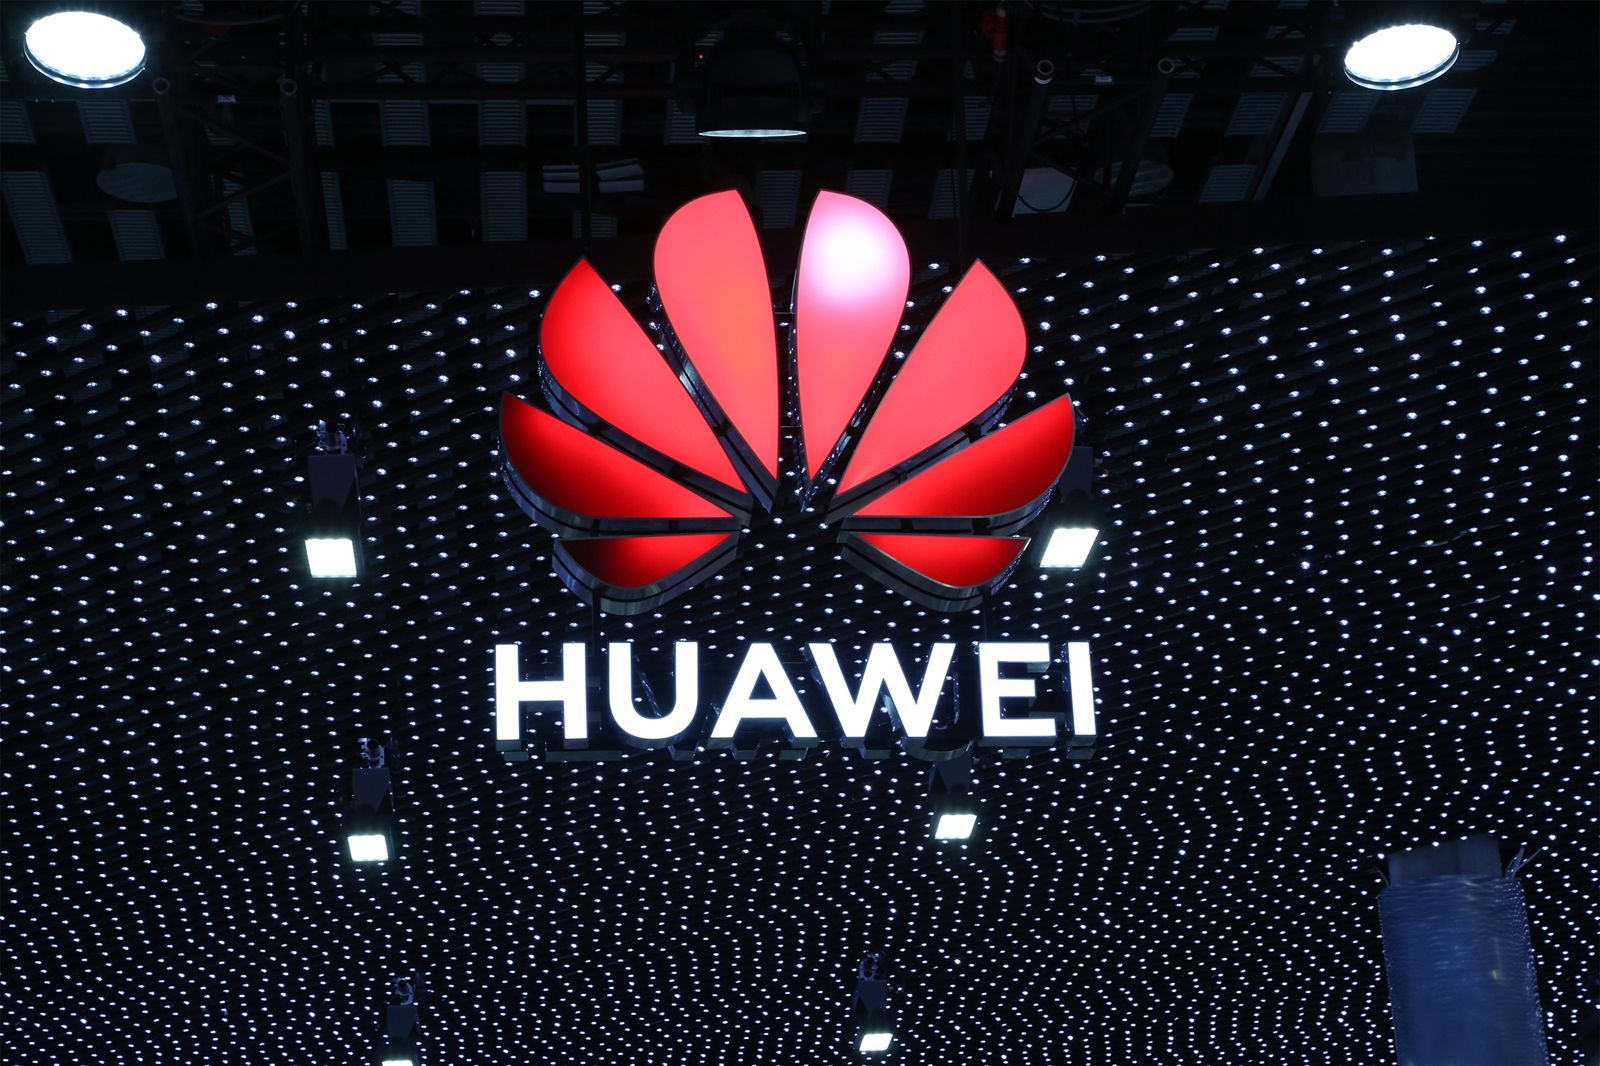 Huawei on 5G Theres no doubt we face some extraordinary challenges image 1